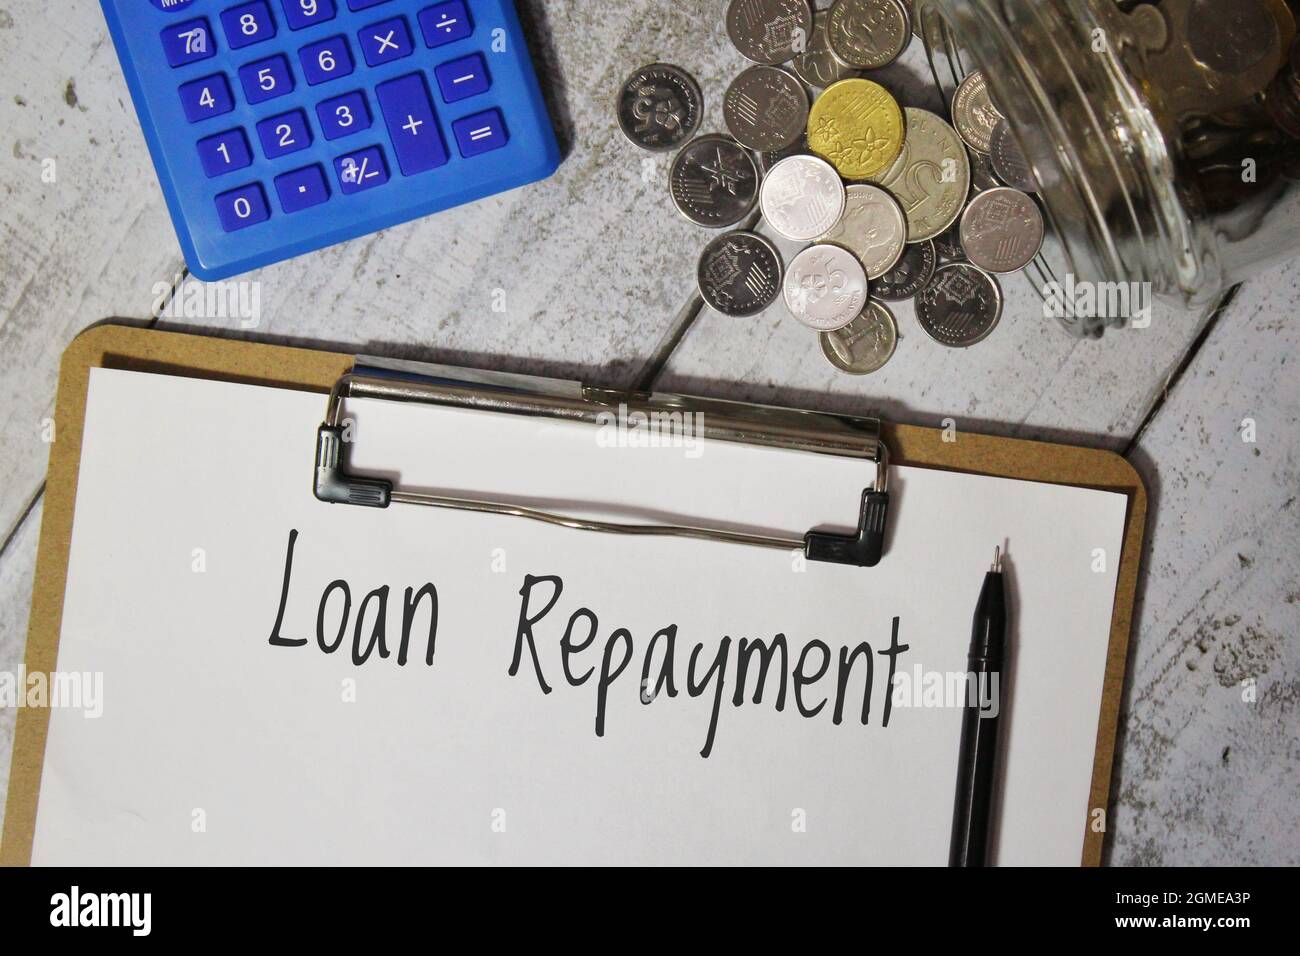 Top view of calculator, coins and paper with text LOAN REPAYMENT. Stock Photo